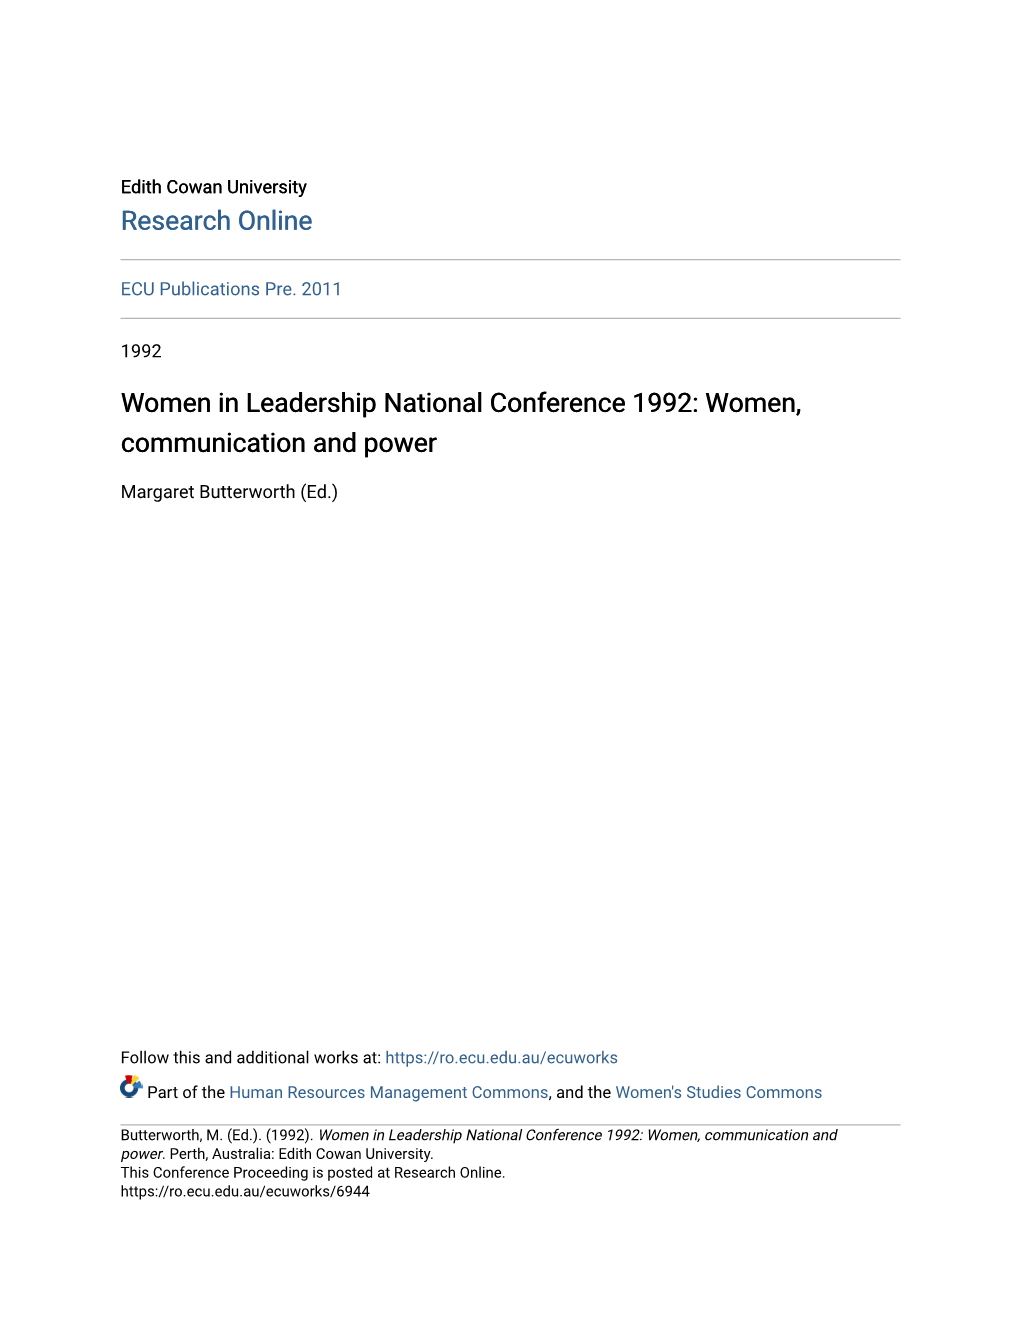 Women in Leadership National Conference 1992: Women, Communication and Power